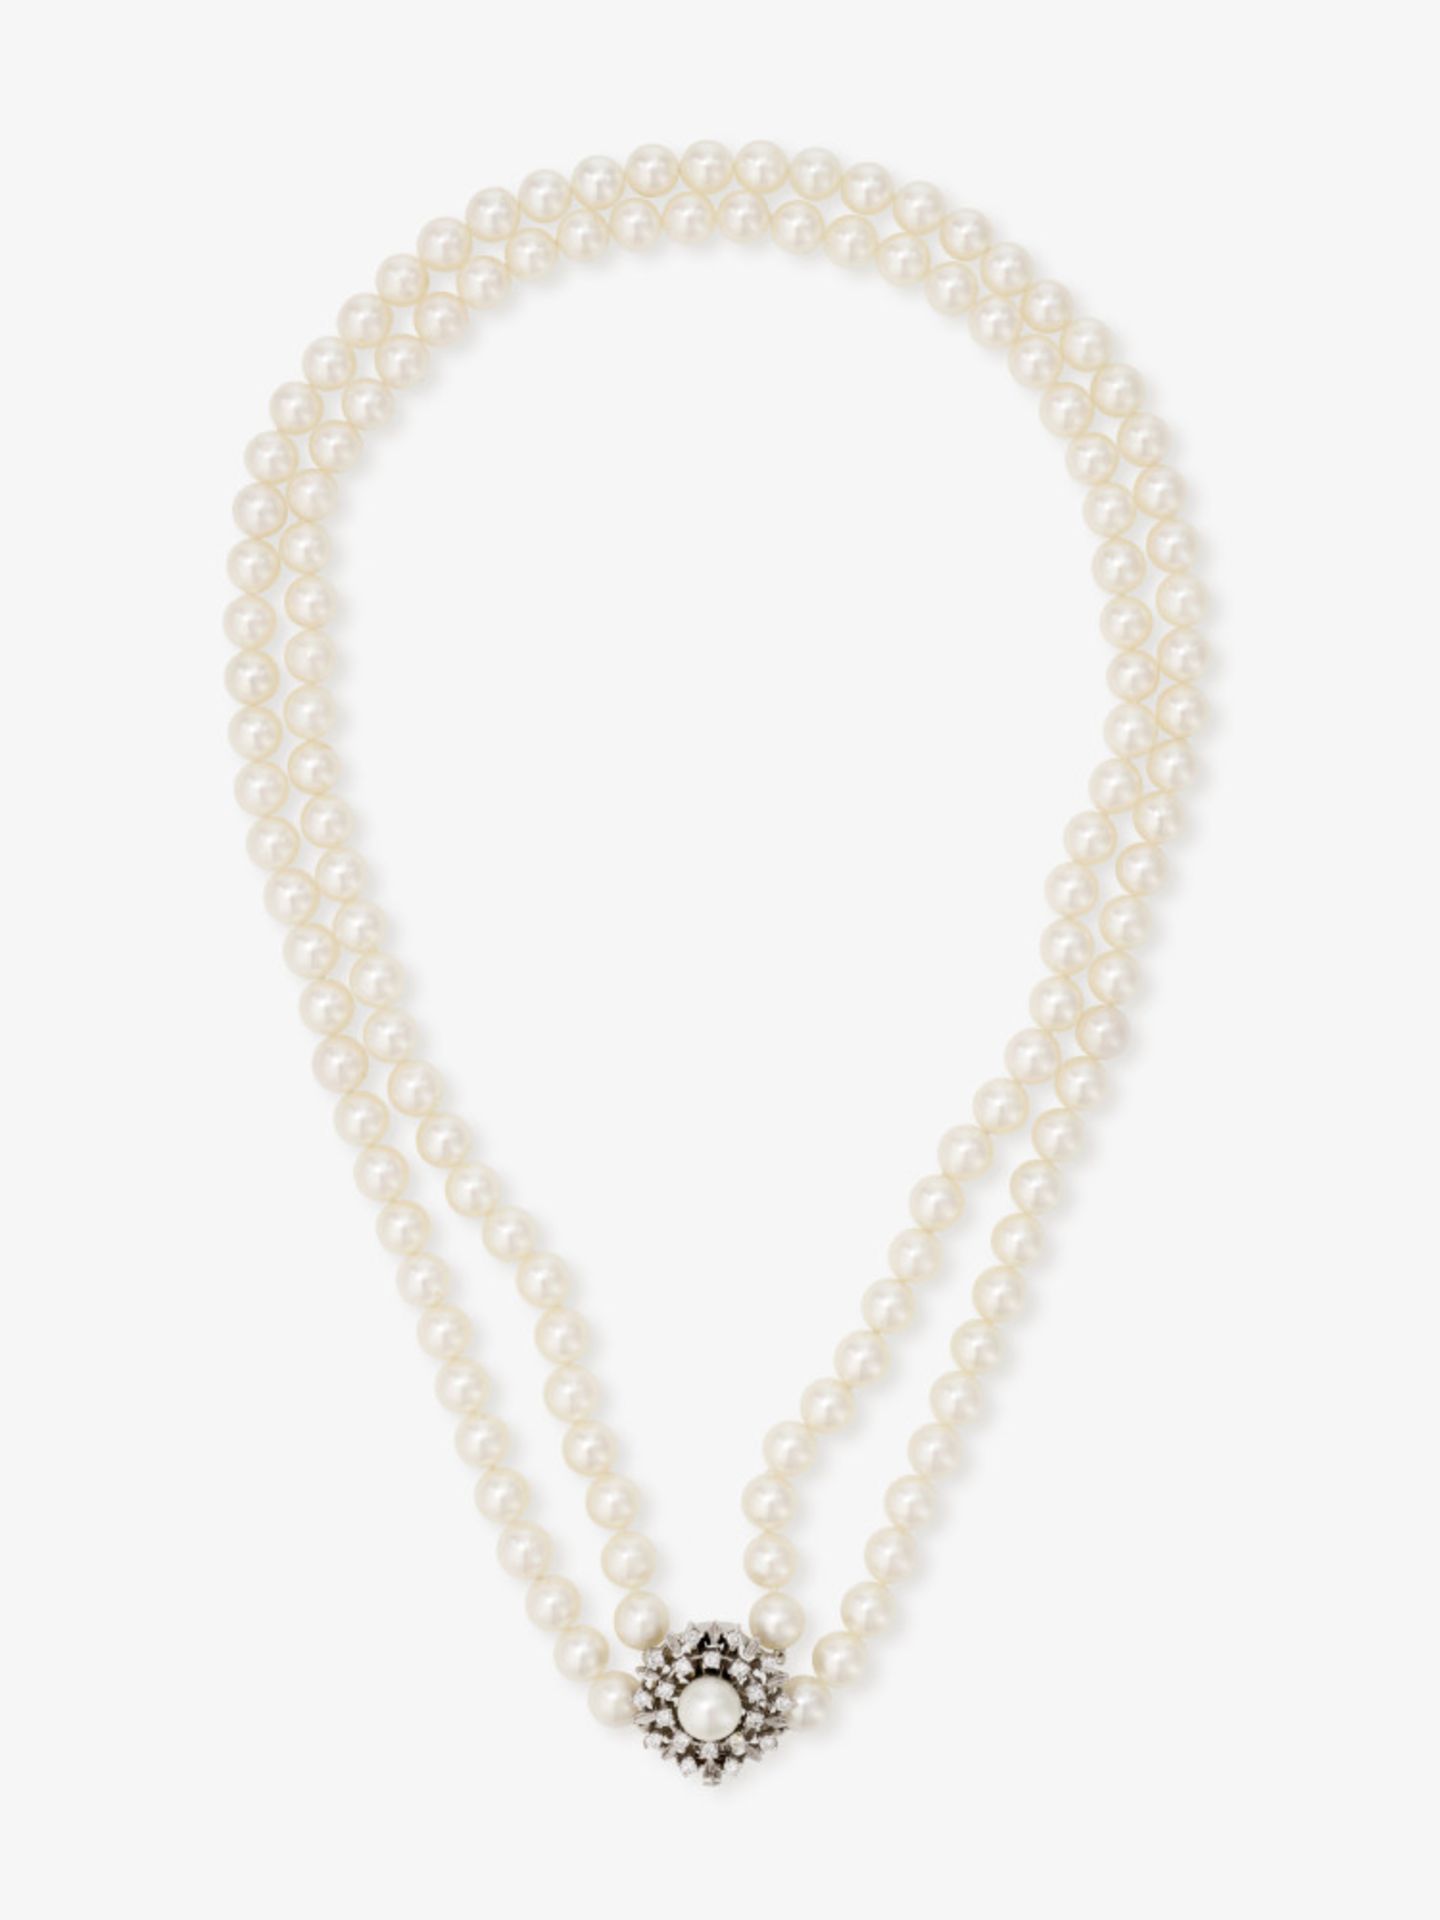 A 2-strand Akoya cultured pearl necklace with brilliant-cut diamond clasp - Germany, 1960s-1970s - Image 2 of 2